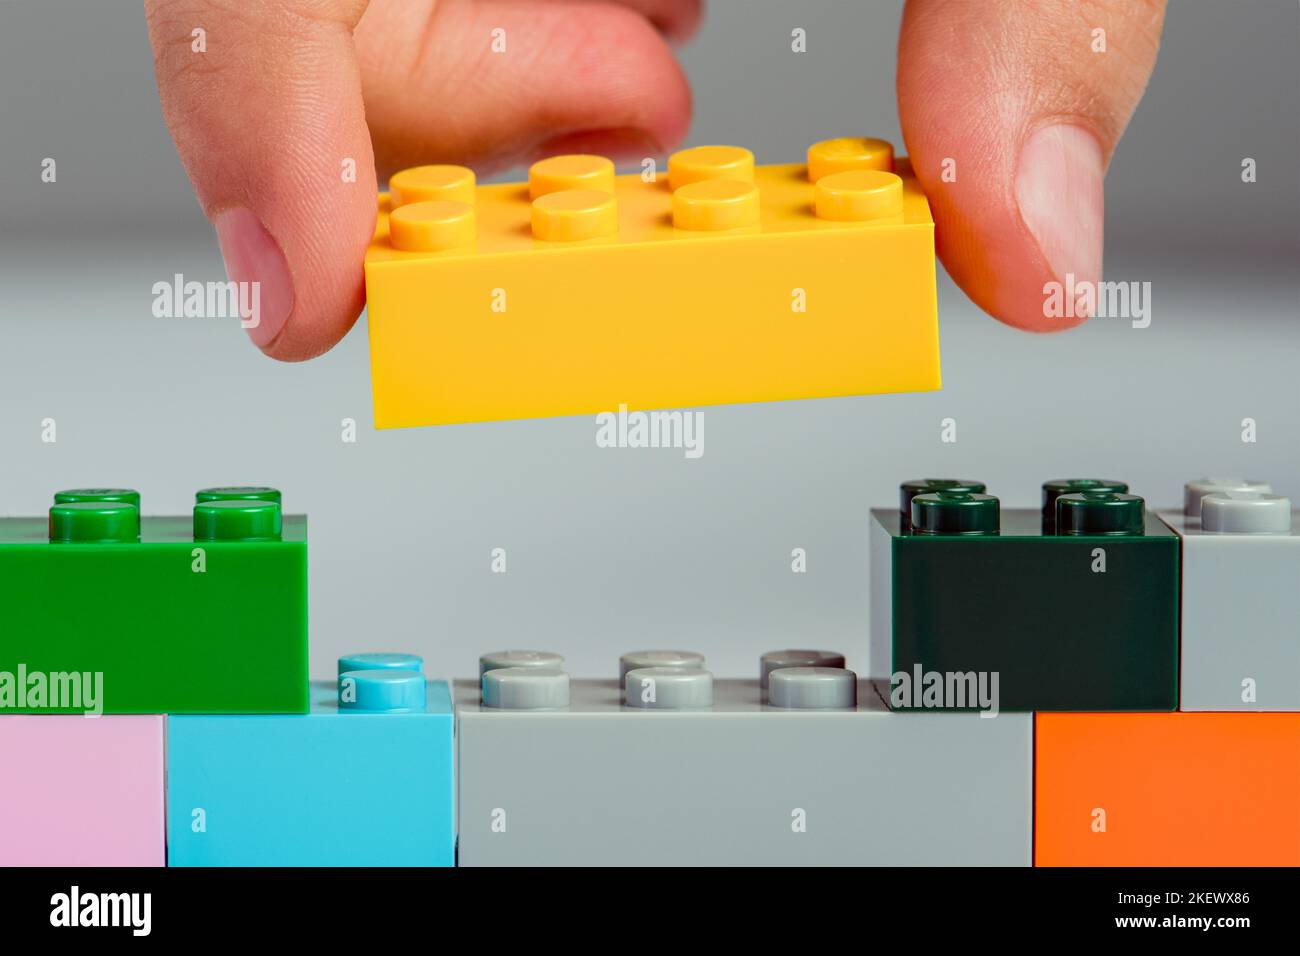 The child builds a tower of blocks. Toy building block in hand close-up. The concept of building and developing fine motor skills of hands Stock Photo